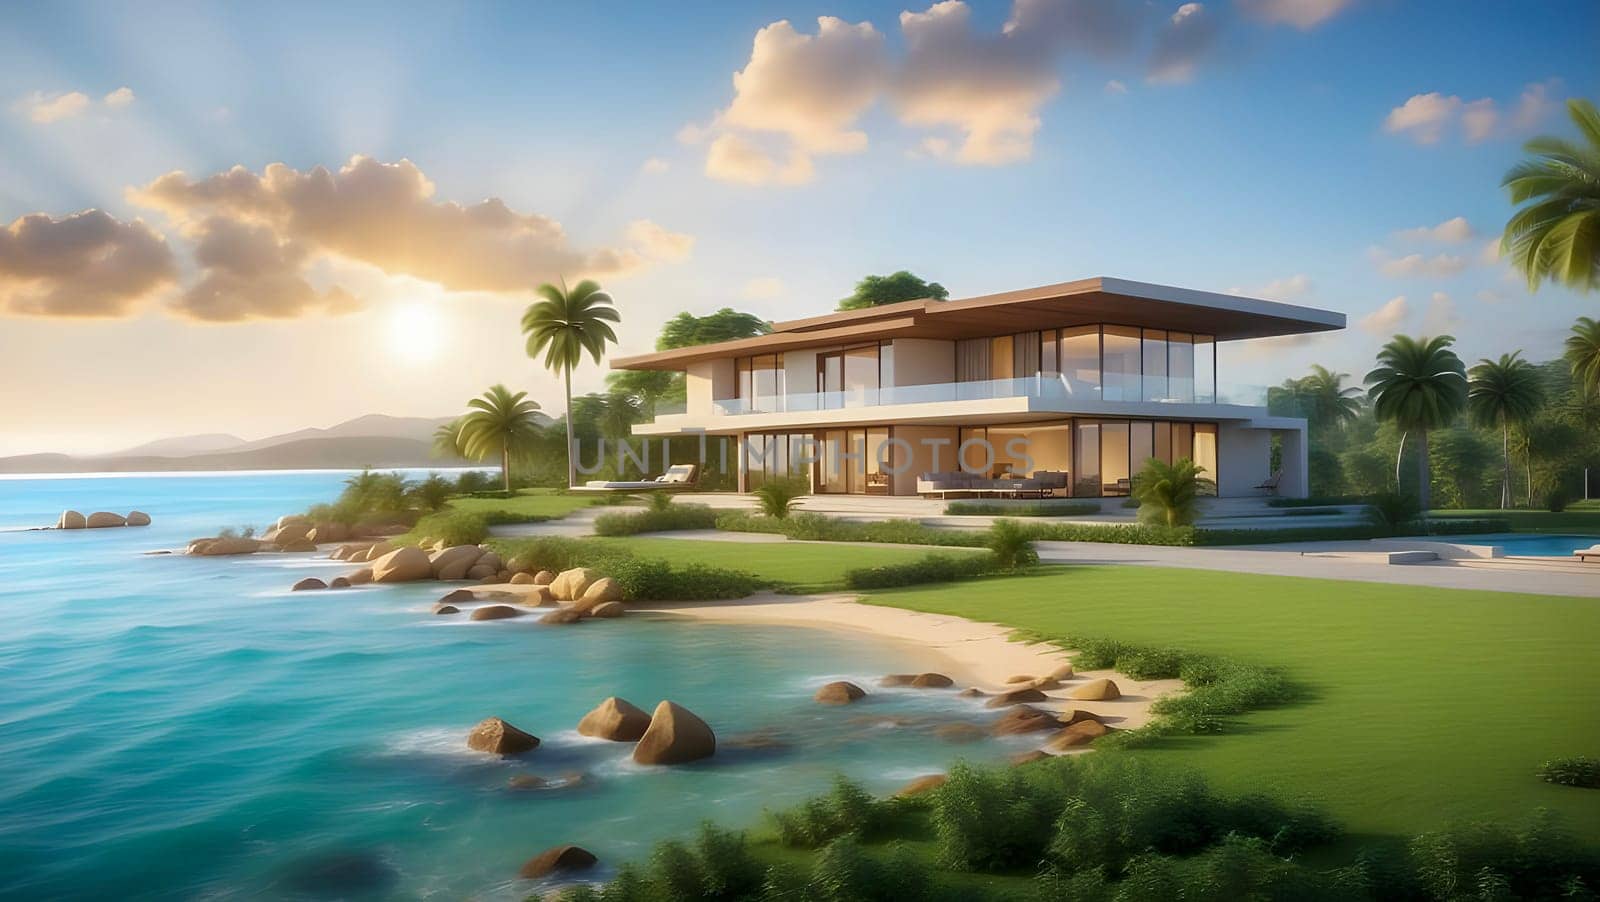 Luxurious beach house with sea views and a large garden in a modern style by stan111